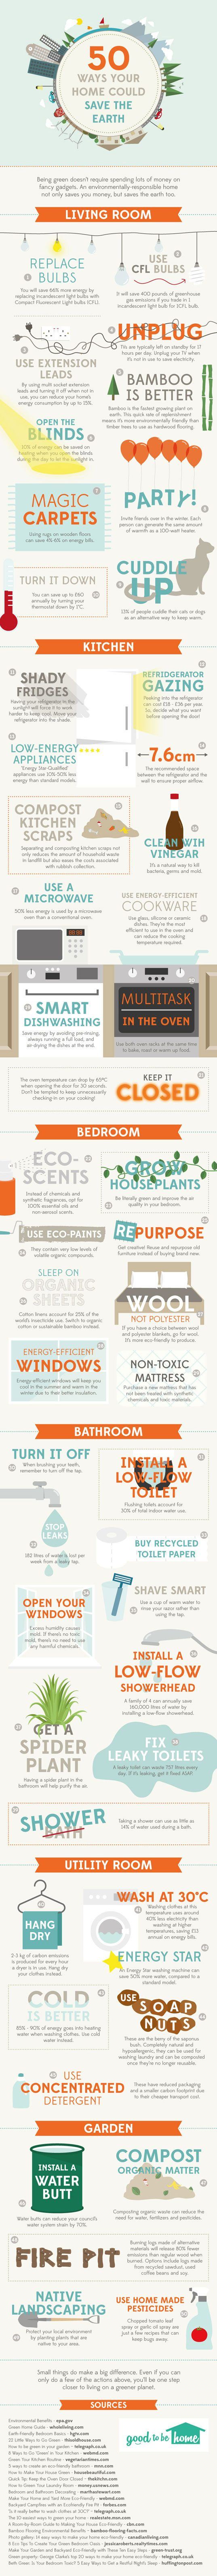 50-ways-your-home-could-save-the-earth-infographic-2